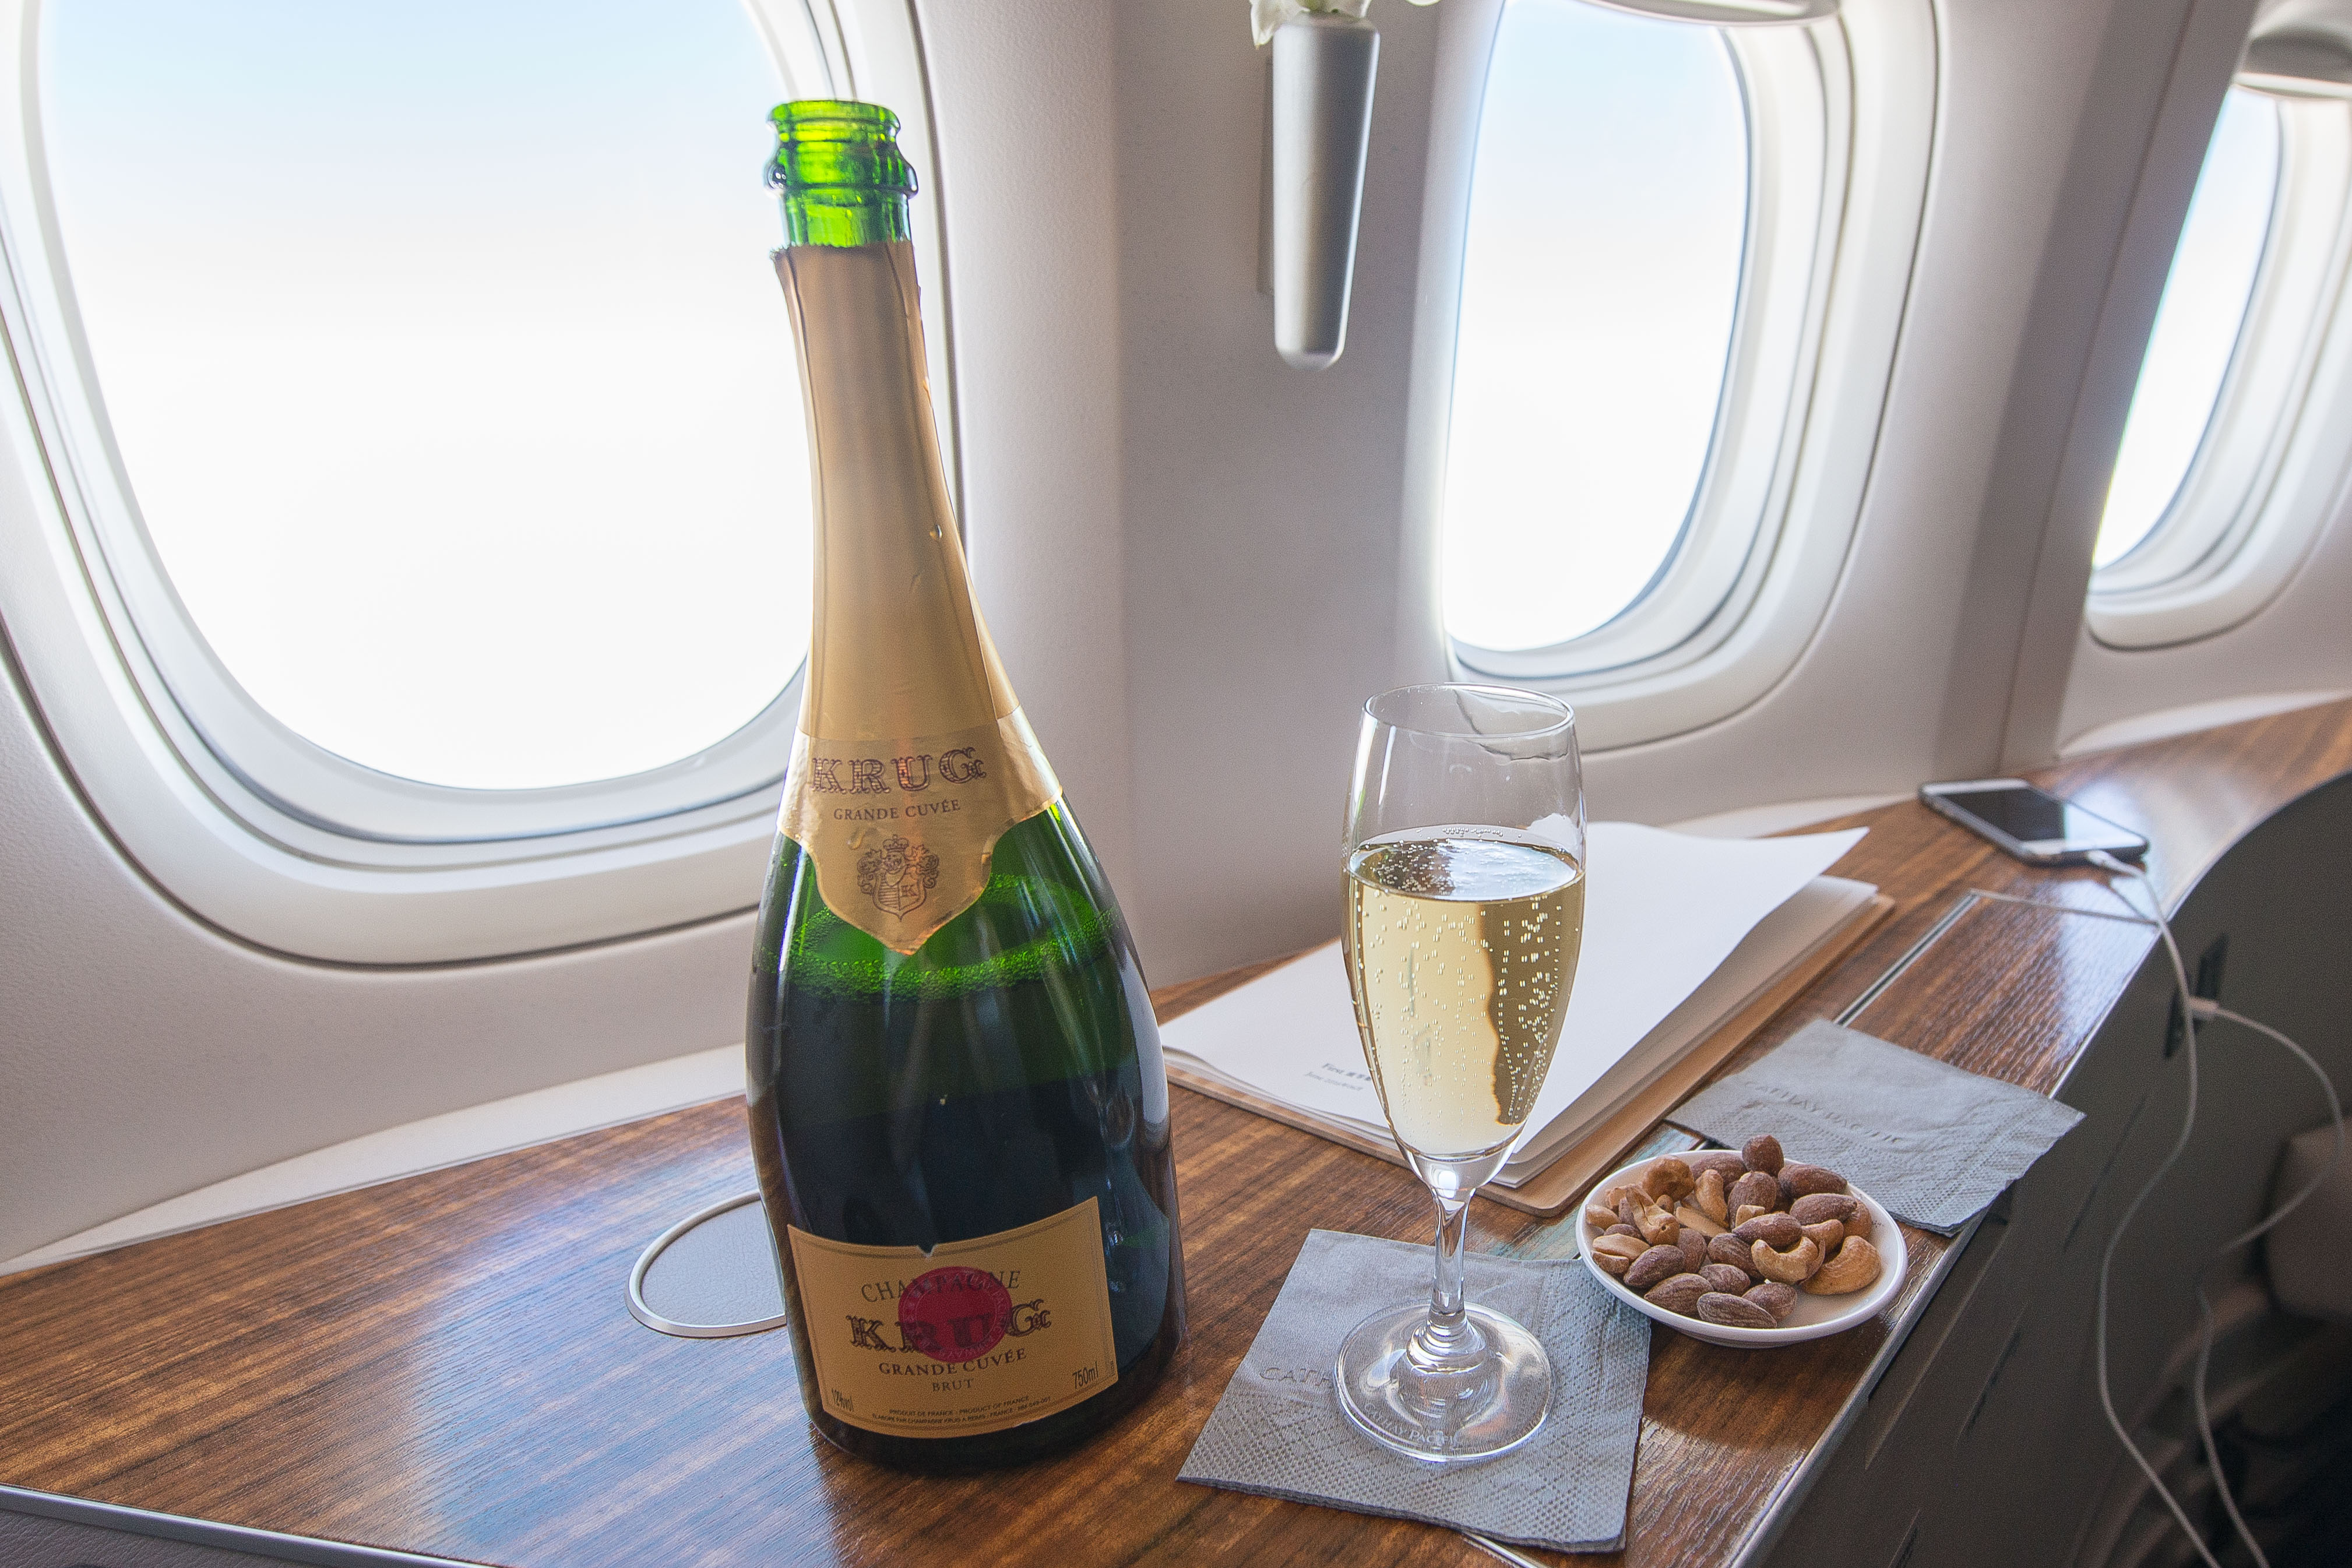 Cathay Pacific 77W First Class Krug Champagne